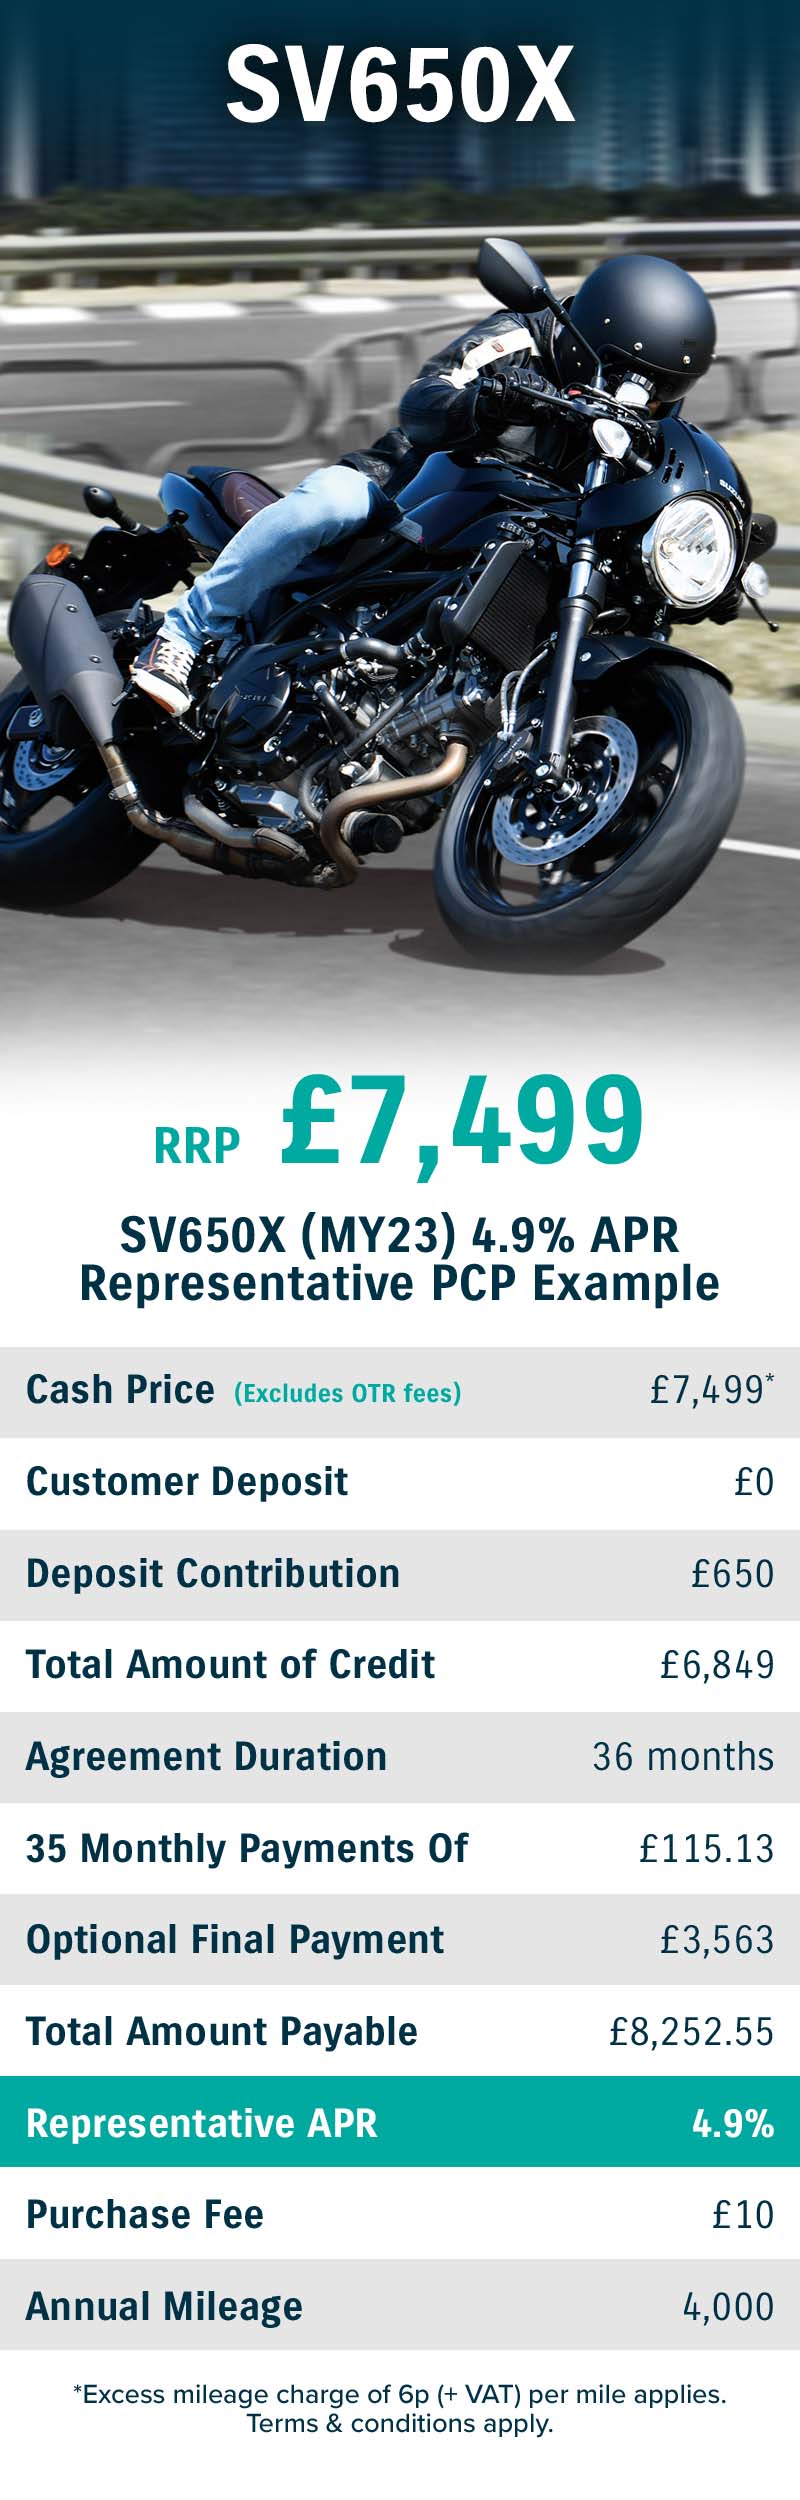 Enjoy a £650 test ride contribution with the Suzuki SV650X at Laguna Motorcycles in Maidstone